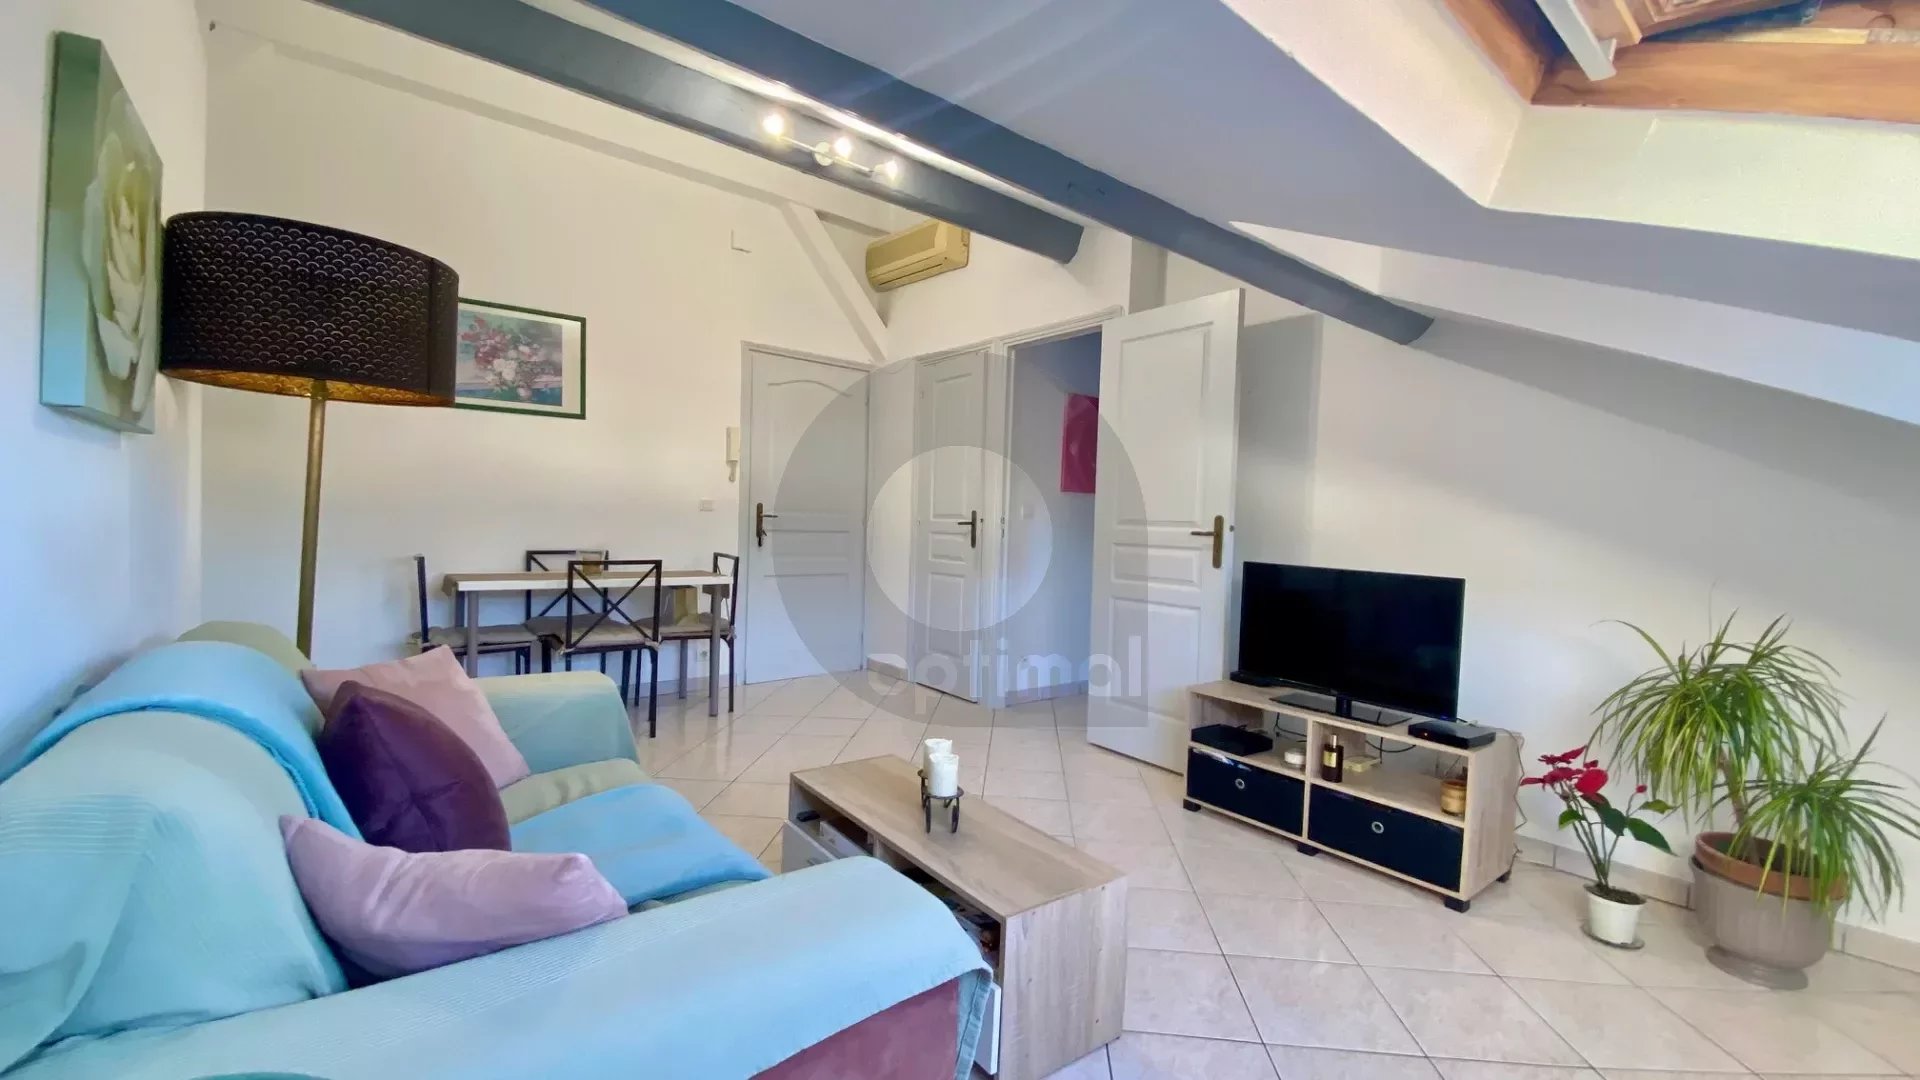 MENTON - Town Centre Spacious 2-room apartment with sloping ceilings